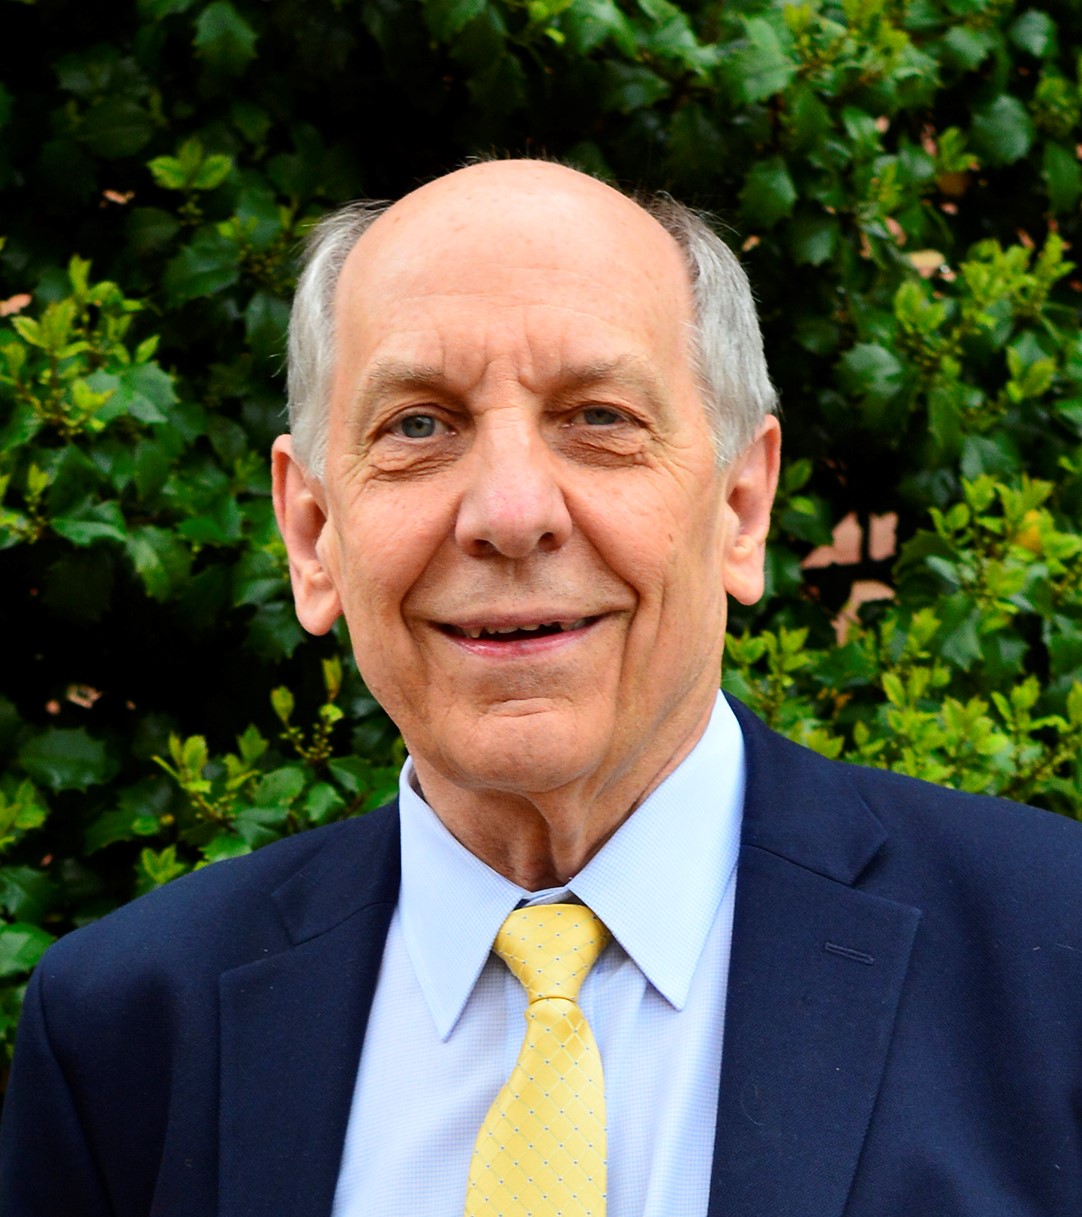 Dr. Louis W. Uccellini smiles at the camera, wearing a navy blazer over a sky blue button-up and a yellow tie